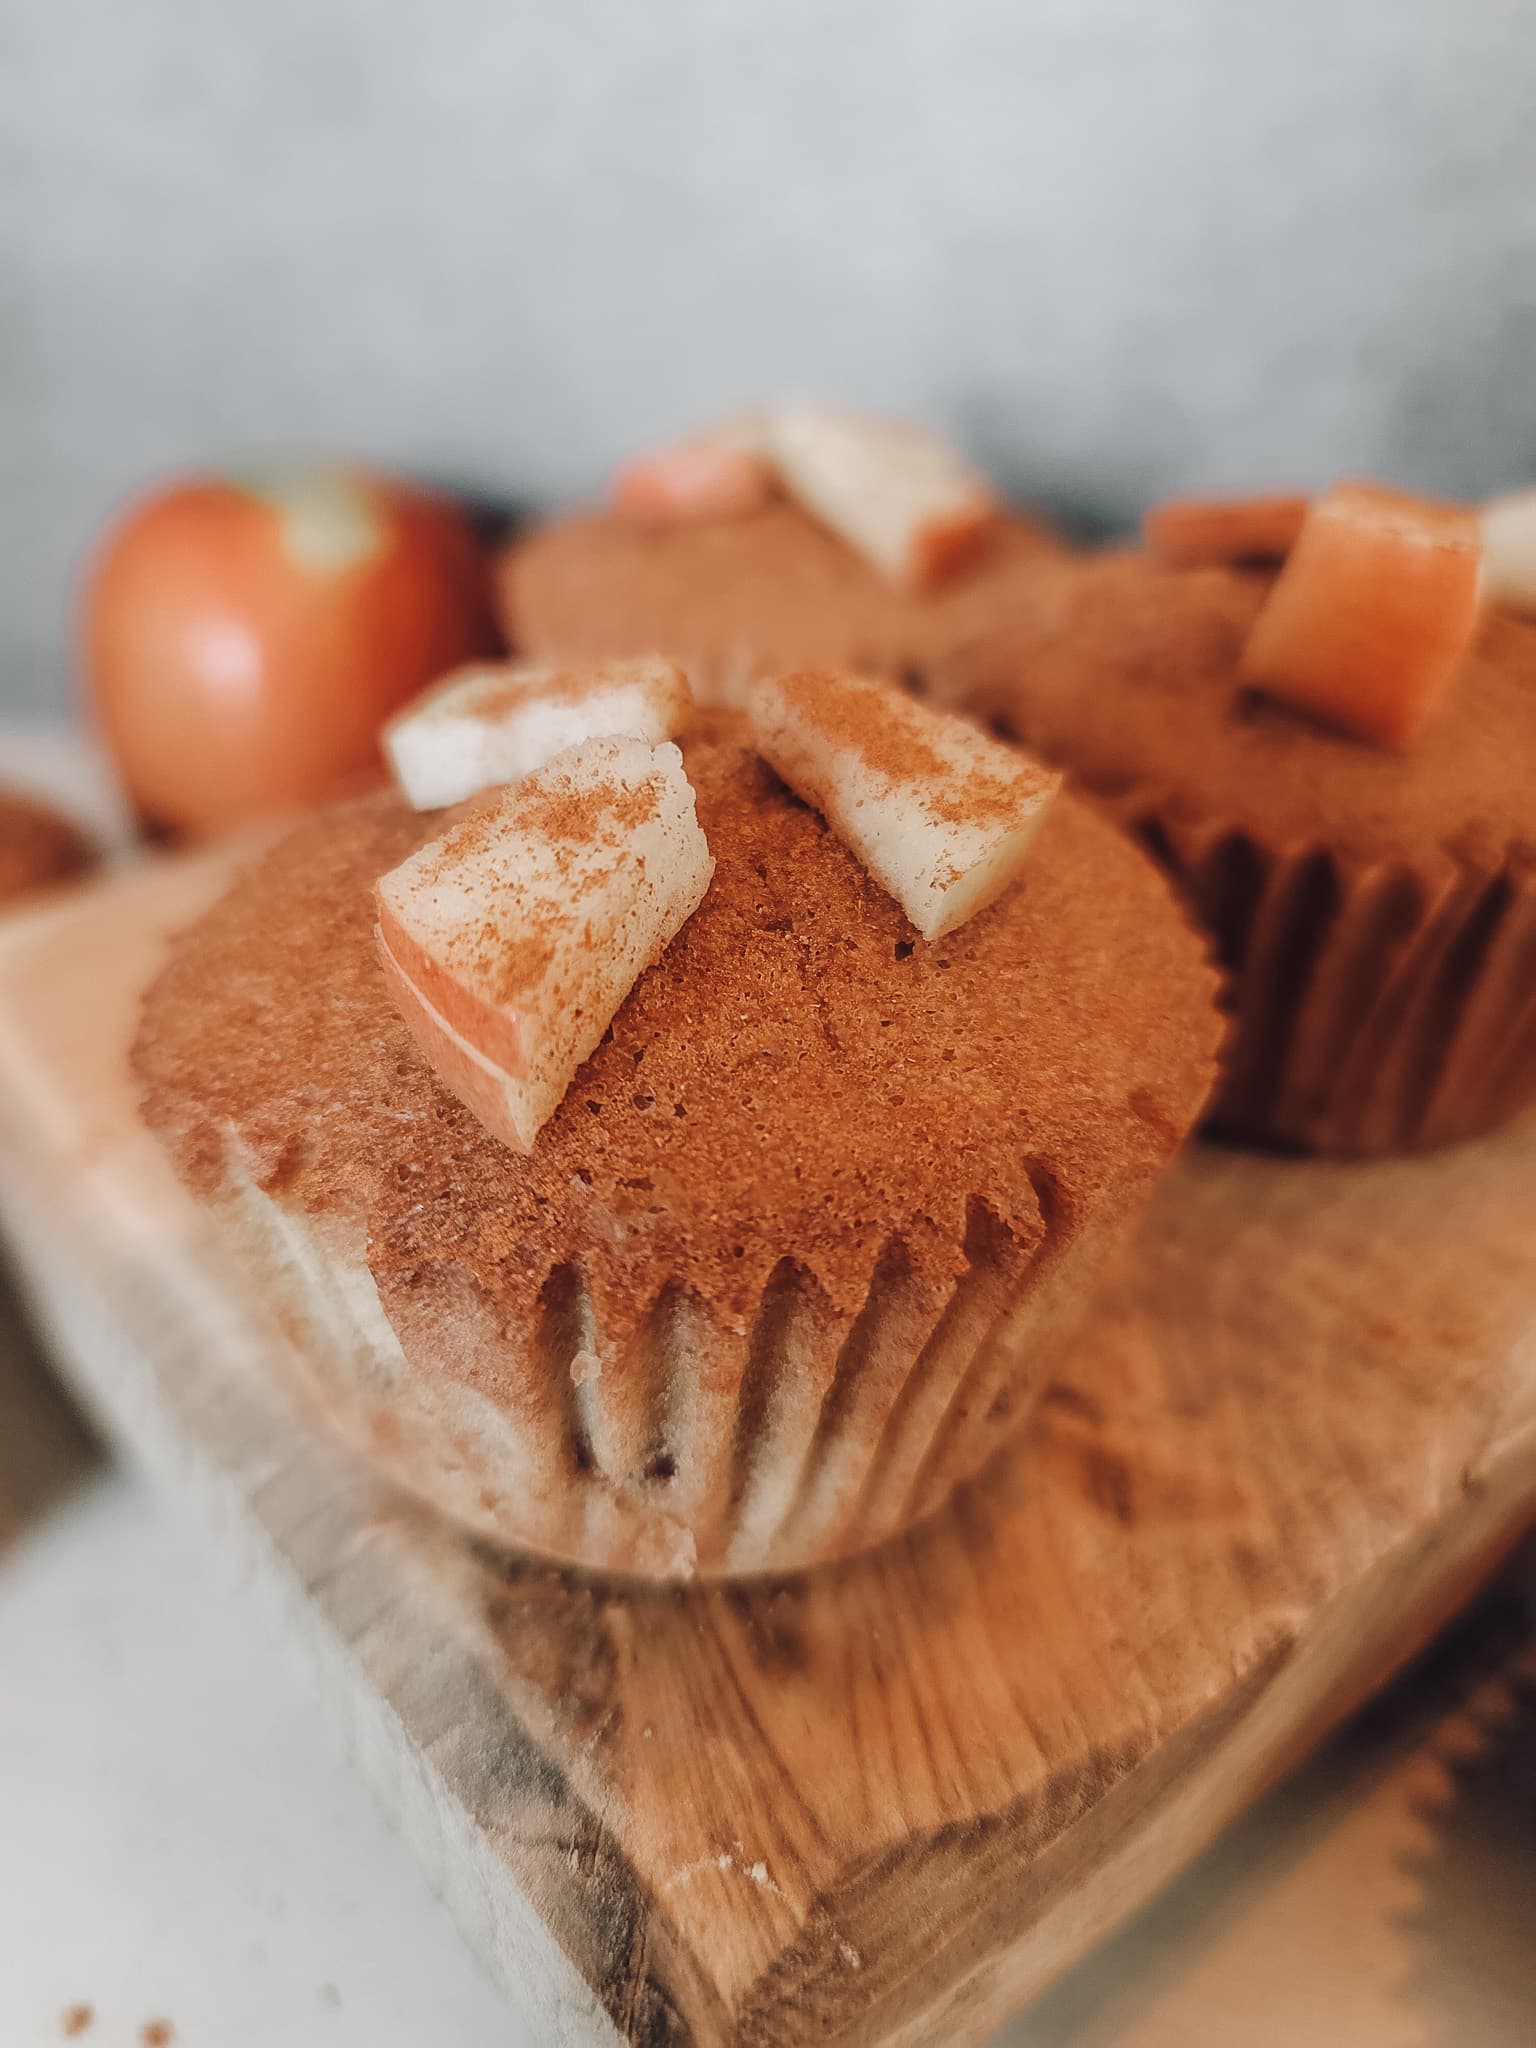 apple sourdough muffin. Bake for 25 minutes or until the muffins spring back when lightly touched. Remove from the oven. Enjoy warm or at room temperature.